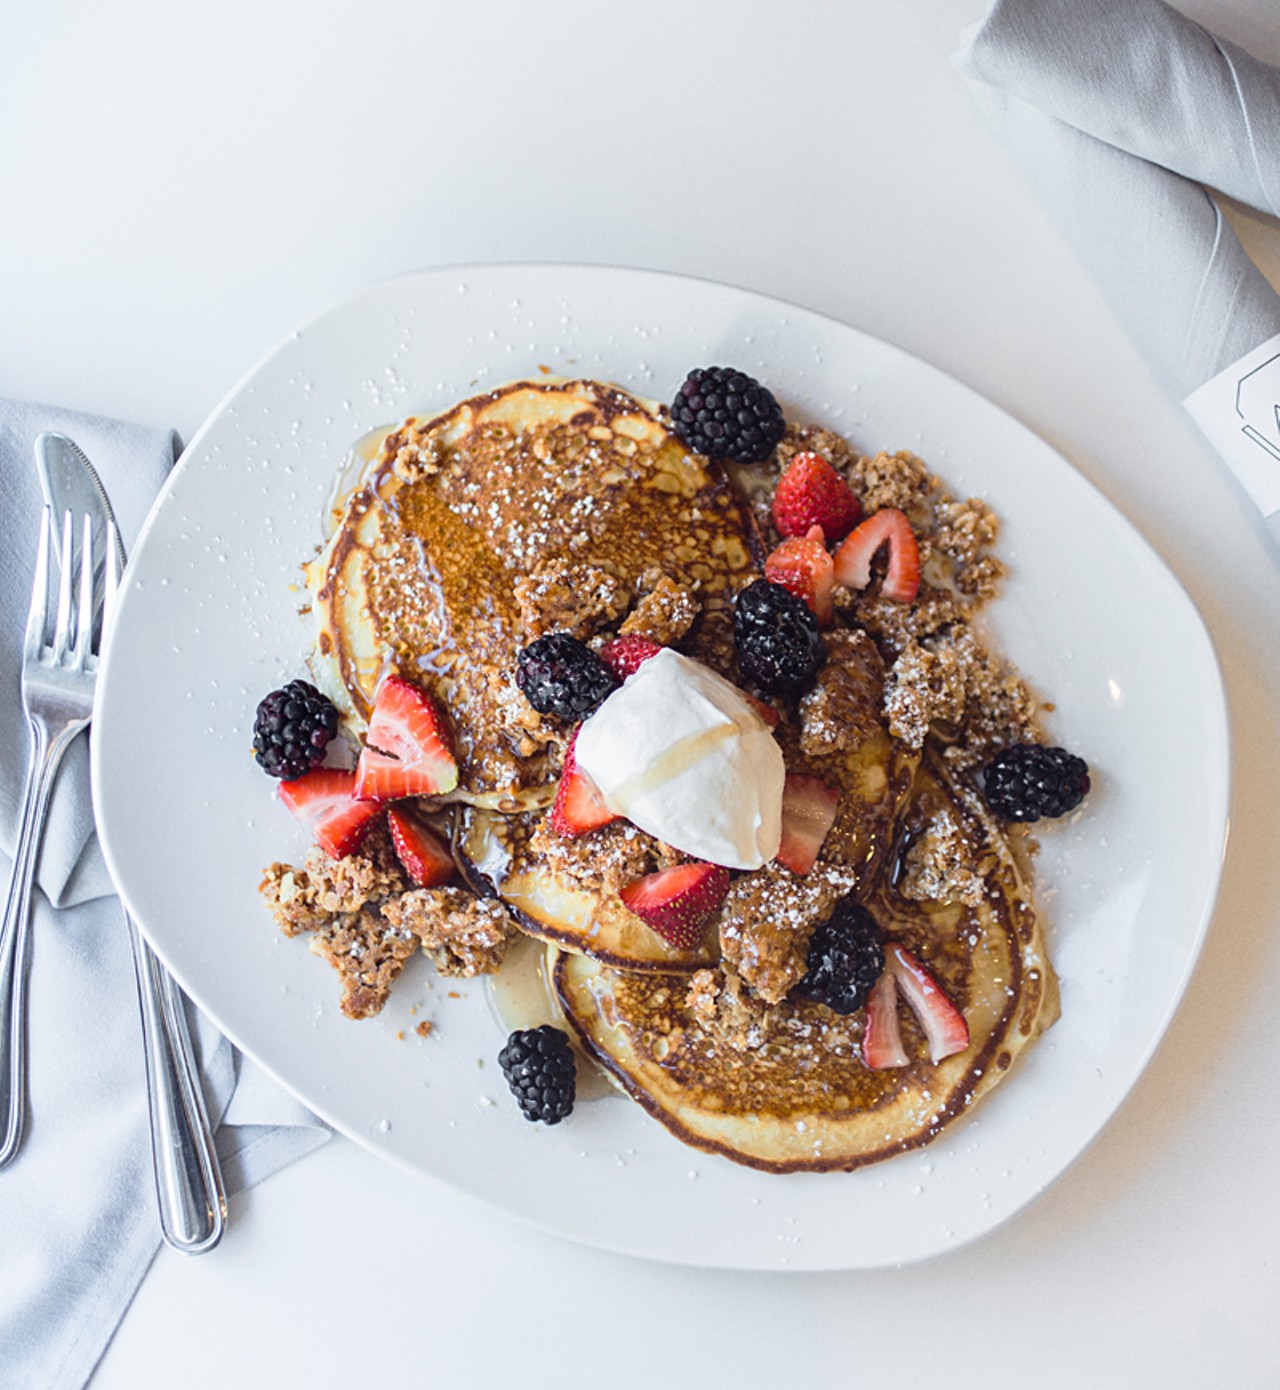 The granola pancakes are standouts, made with sweet cream, berries and maple syrup.